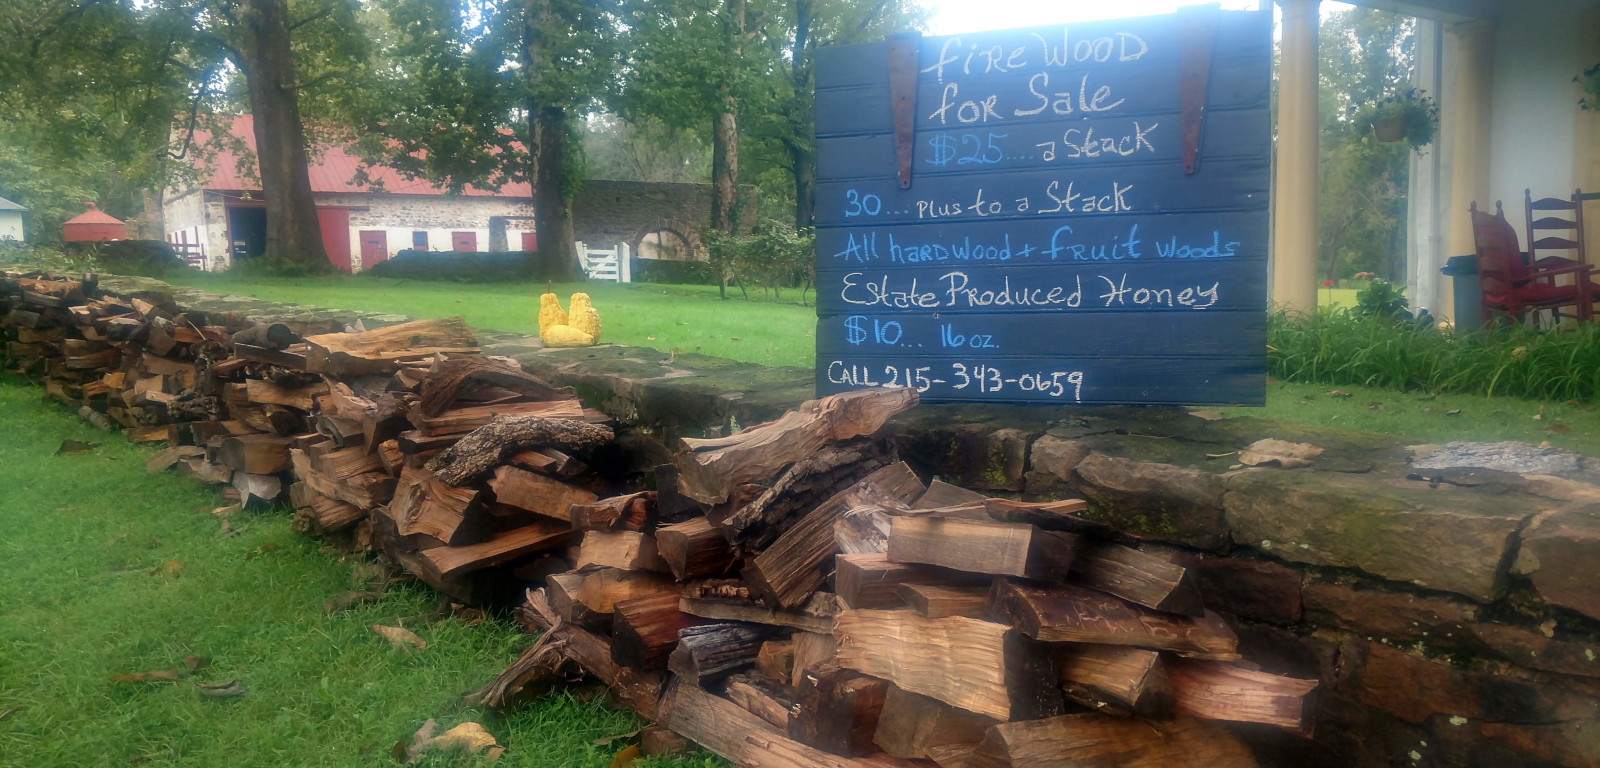 sign selling firewood with stacks of wood against stone wall with barn in distant background